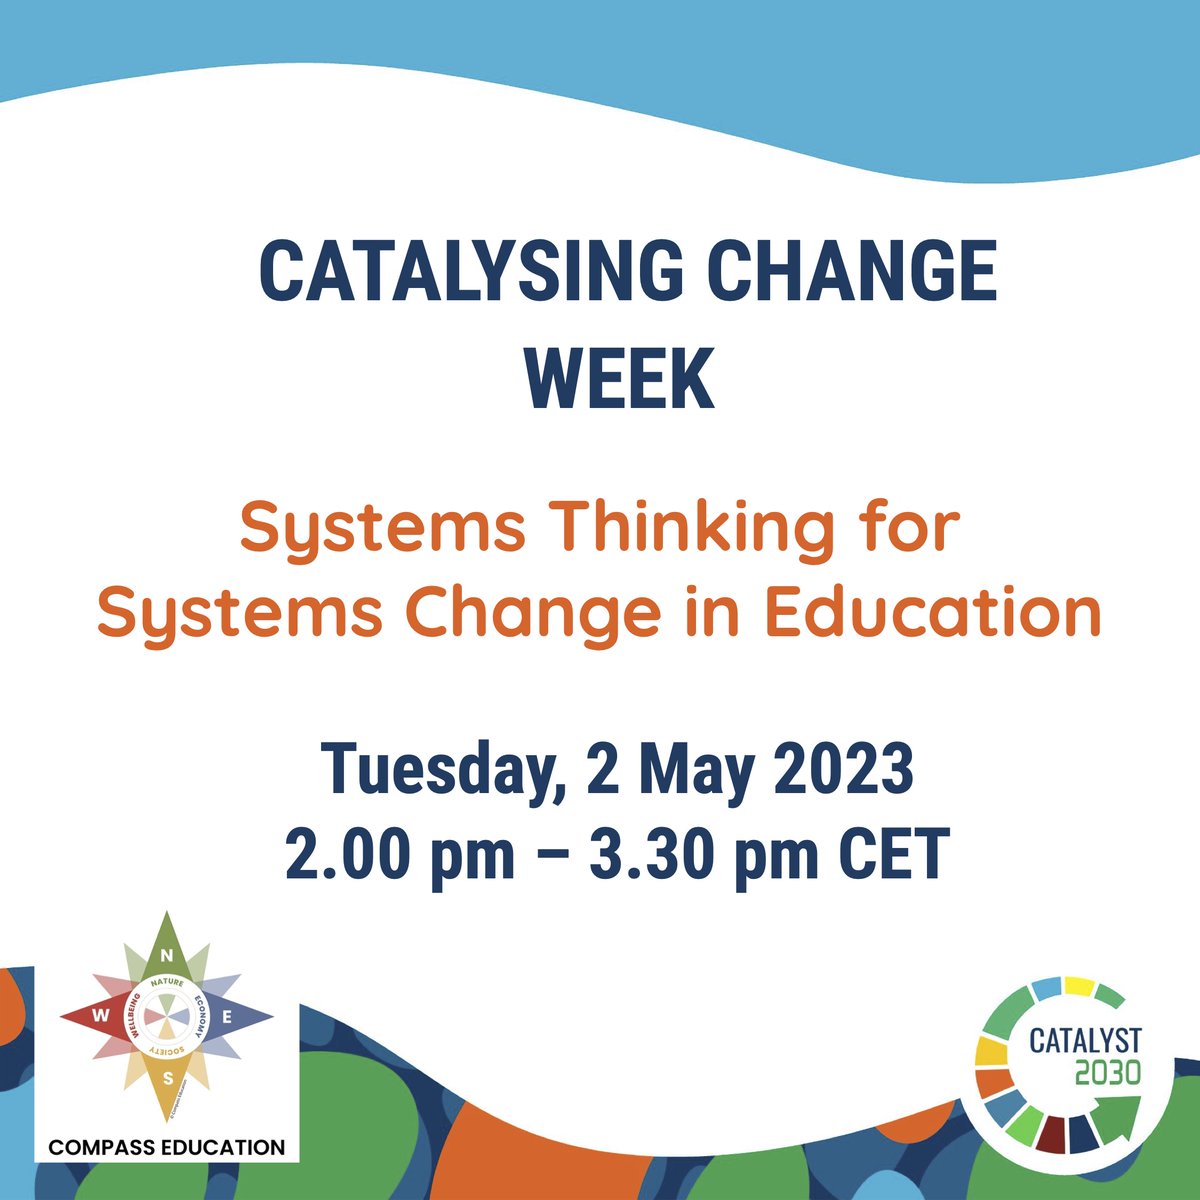 Join us during #CatalysingChangeWeek2023 on Tuesday 2 May 2023 2.00 pm – 3.30 pm CET in our session 'Systems Thinking for Systems Change in Education' with @GitanjaliGPaul, @laurence_myers, @KathKtl & @NicoleSwedlow | Register at: catalyst2030.info/RegisterCCW
@Catalyst_2030 | #CCW2023